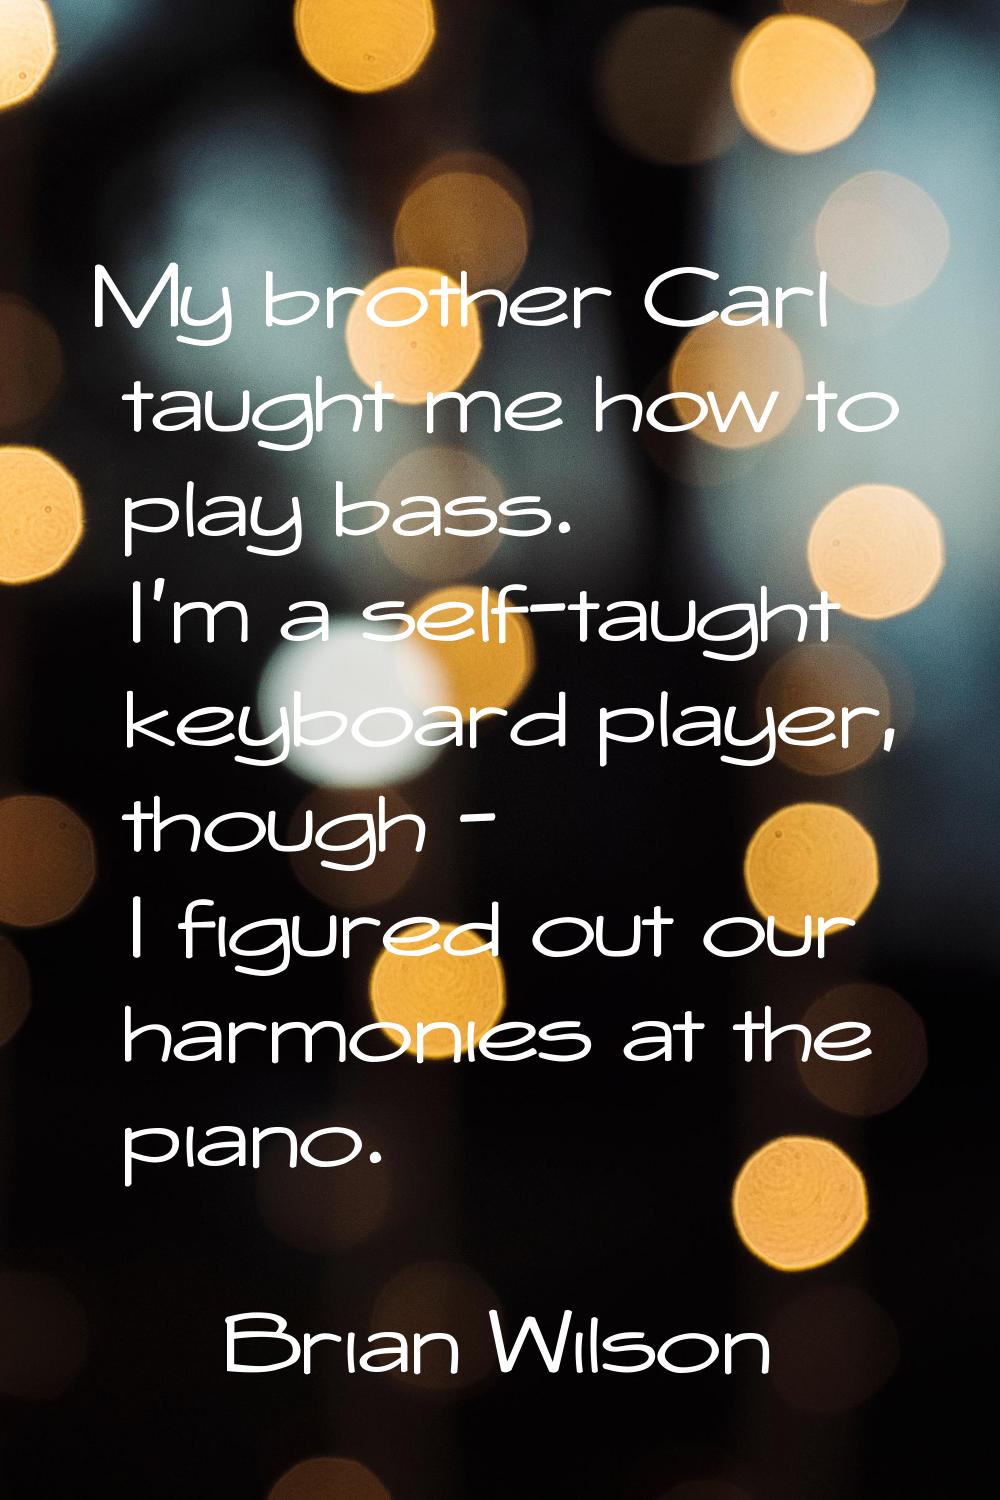 My brother Carl taught me how to play bass. I'm a self-taught keyboard player, though - I figured o